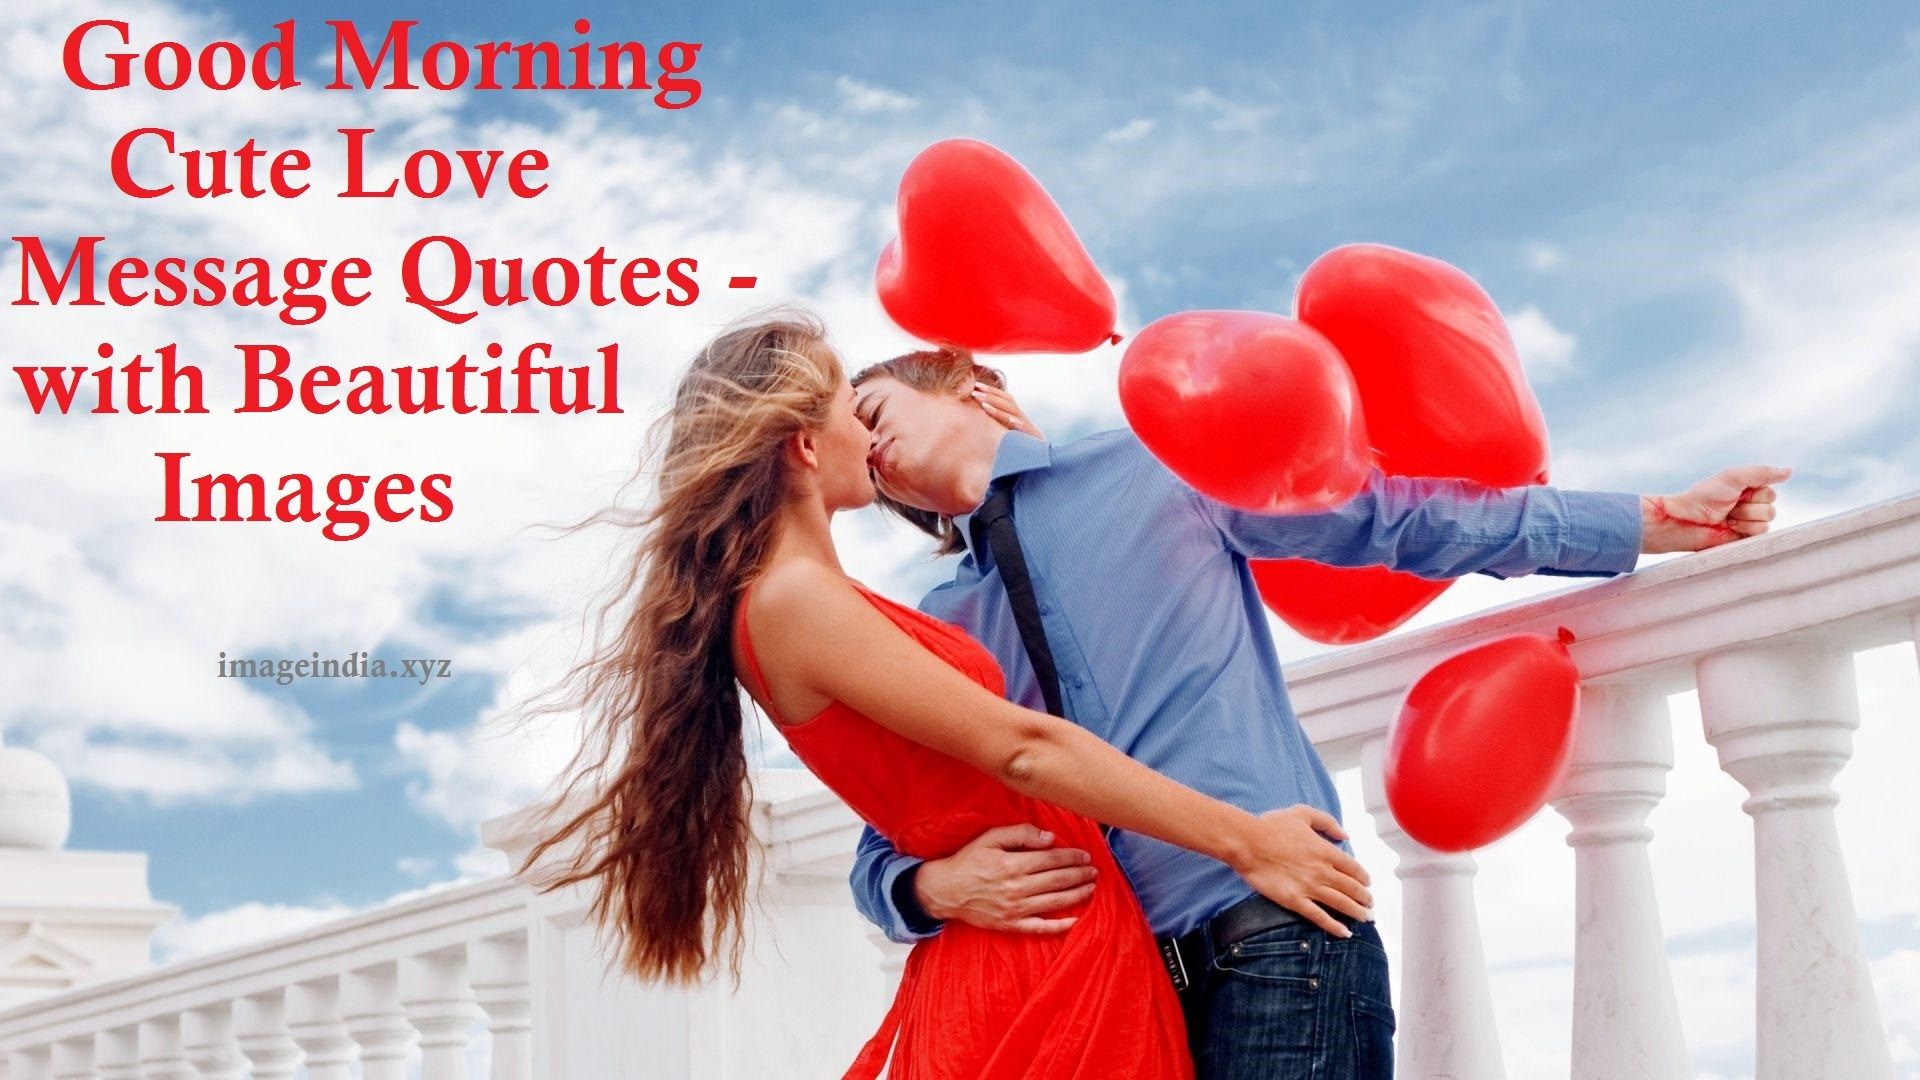 Good Morning Cute Love Message Quotes Beautiful Image